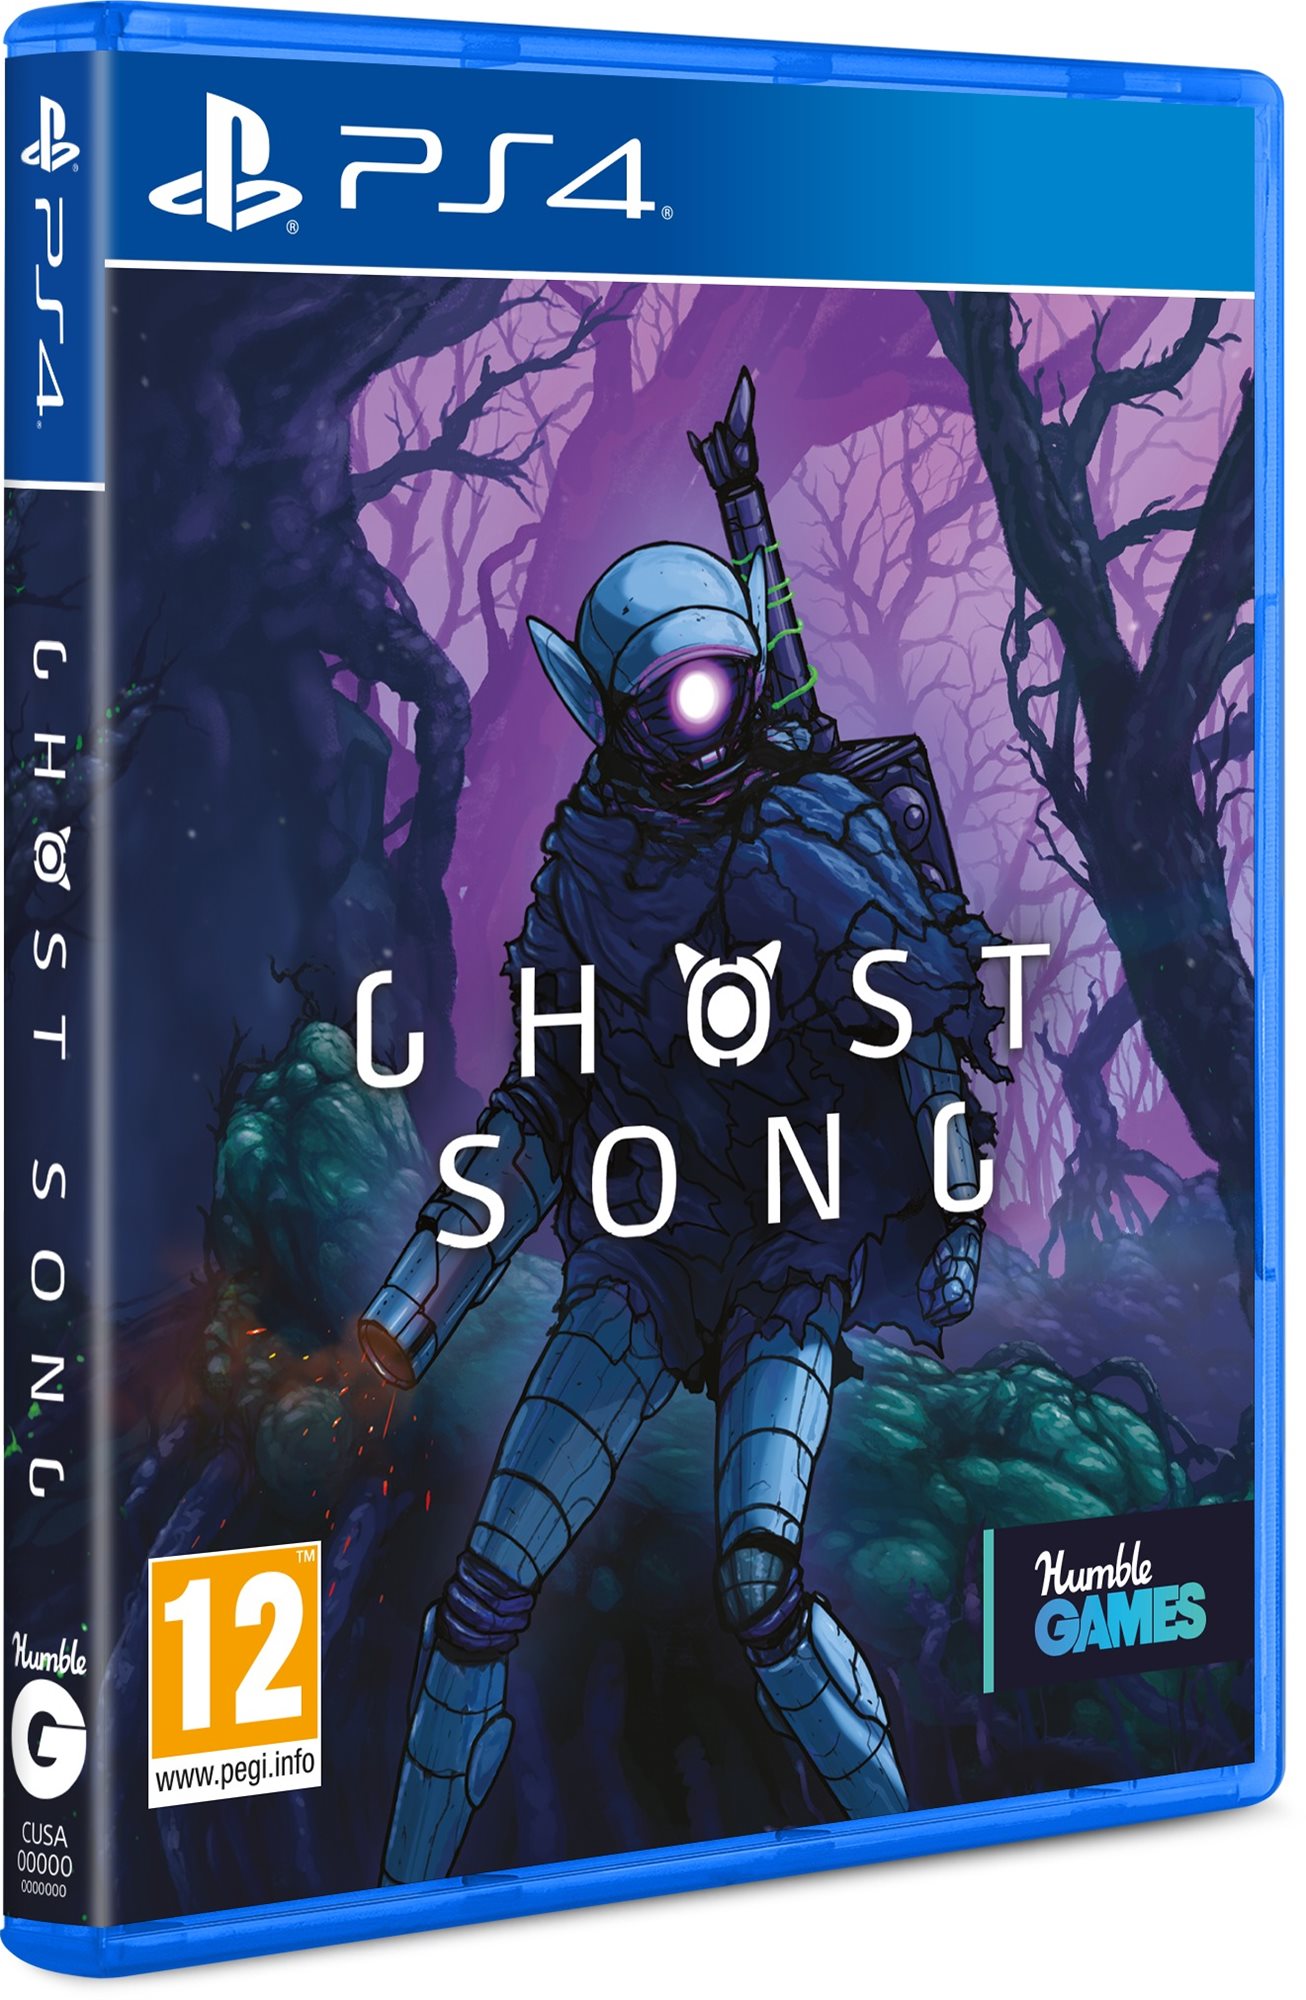 Ghost Song - PS4